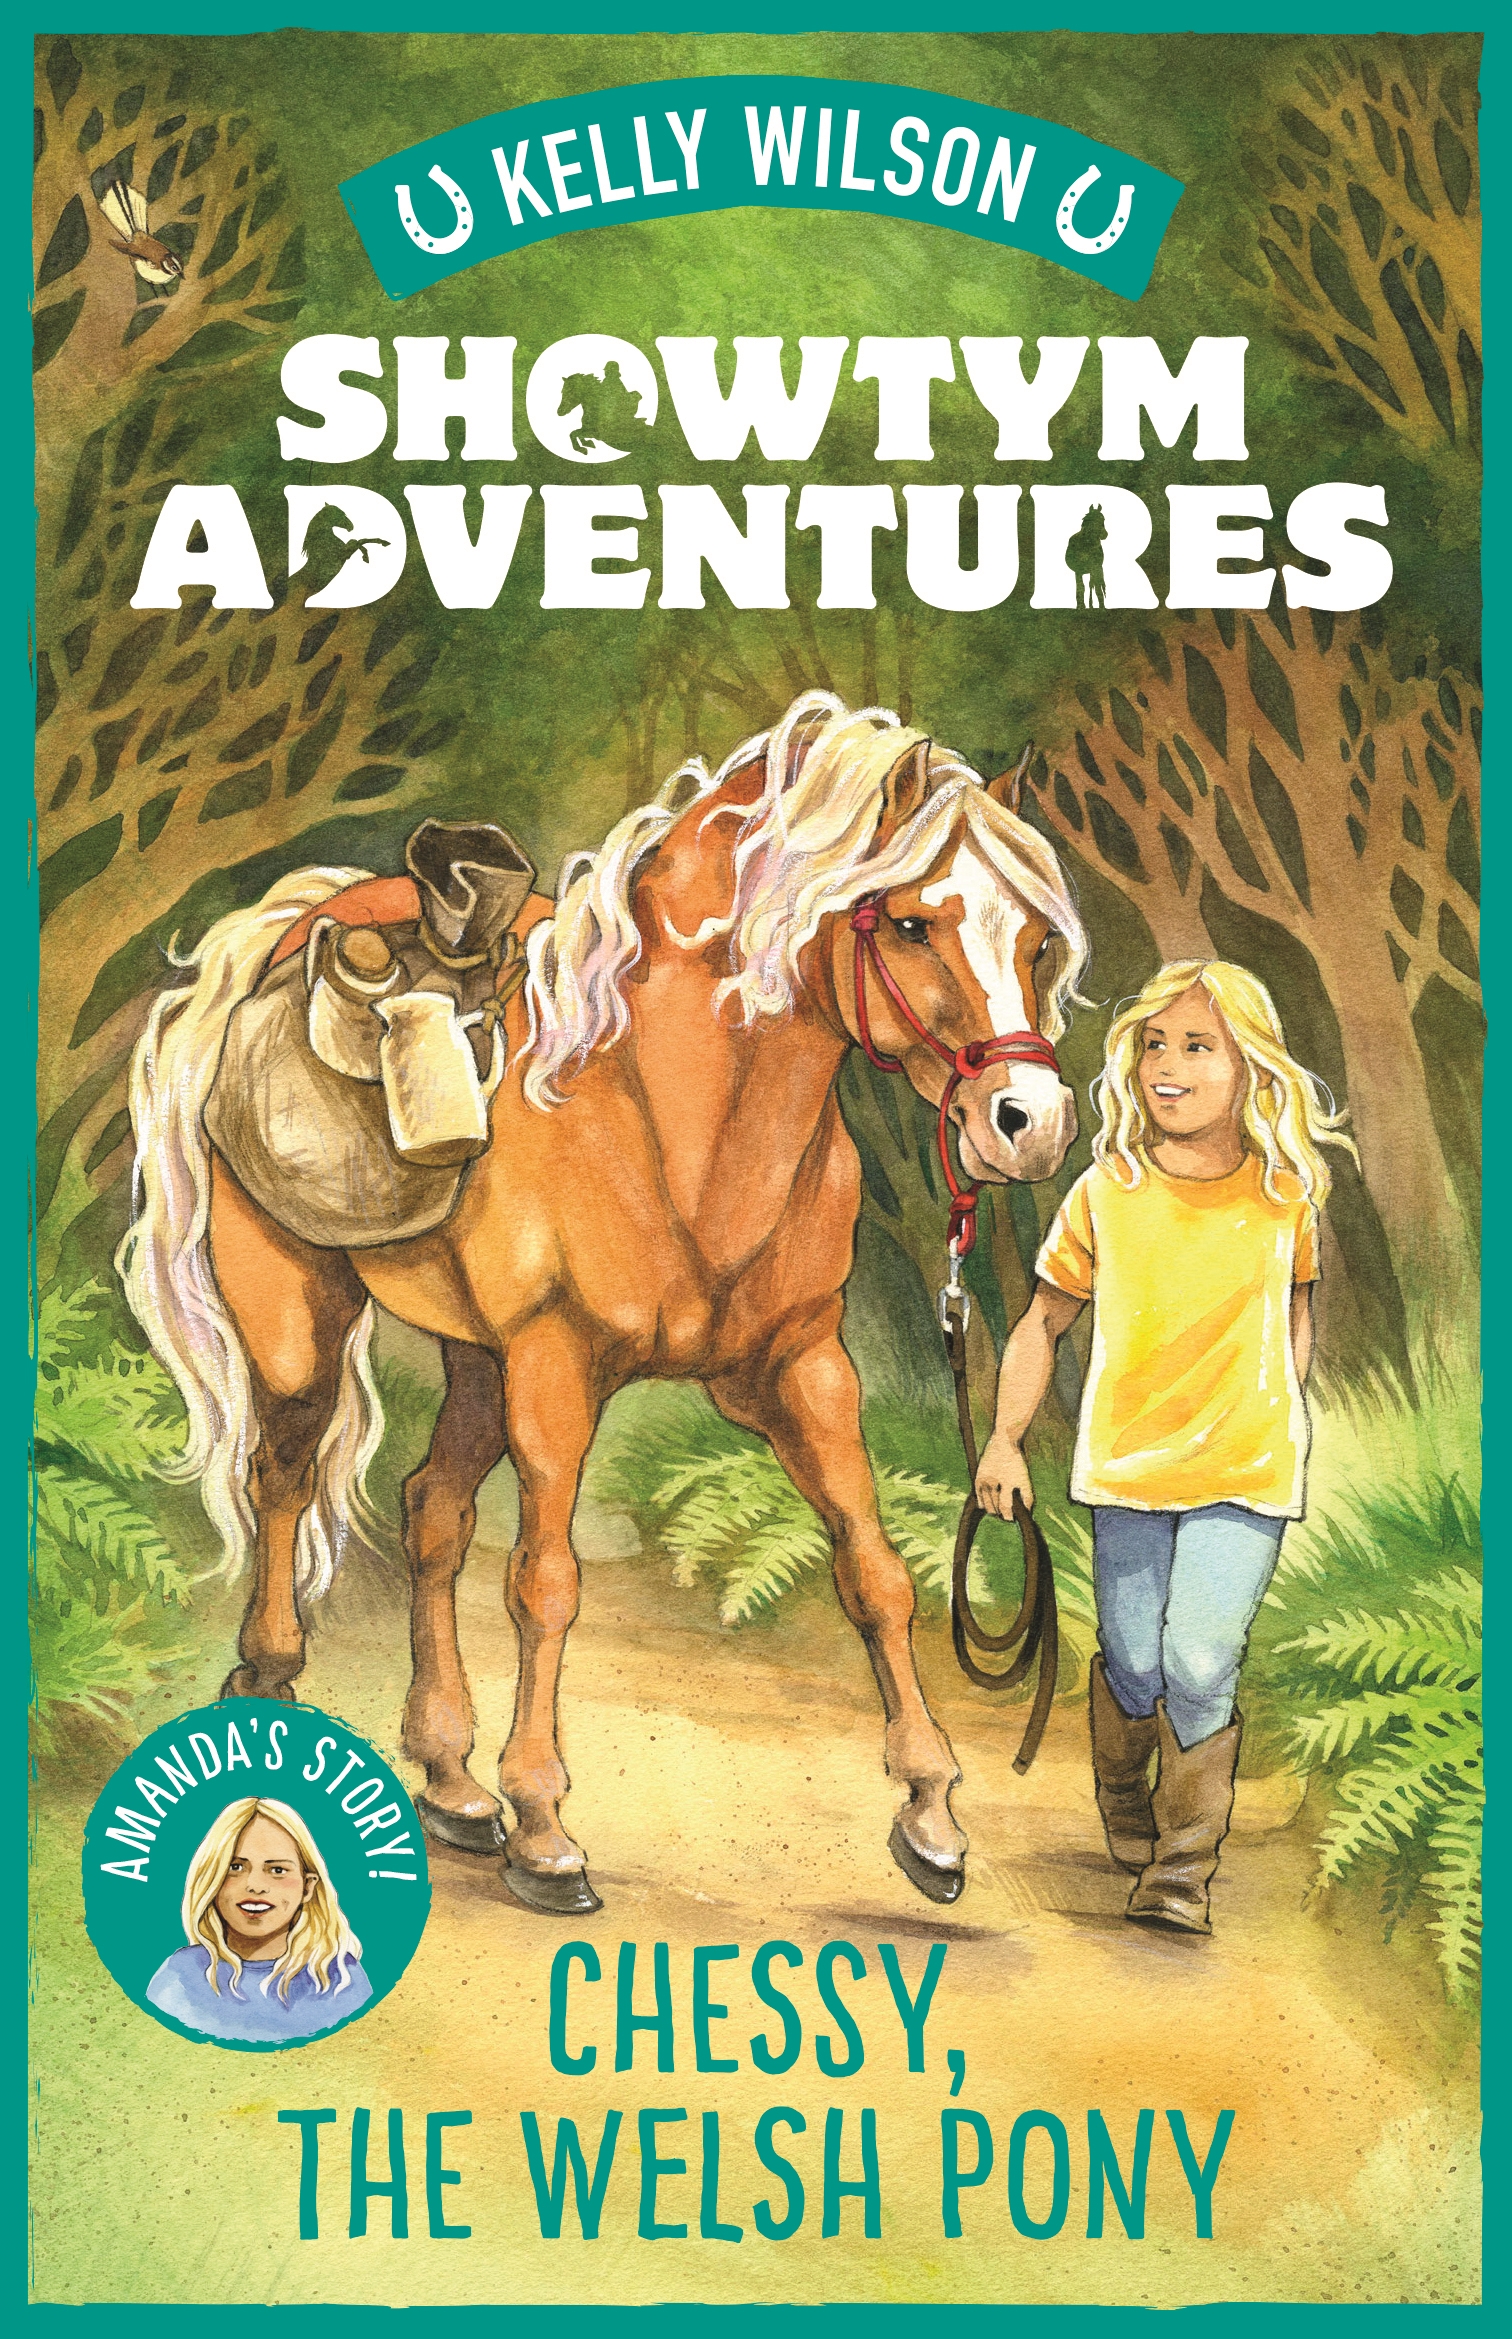 Showtym Adventures Annual by Kelly Wilson - Penguin Books 